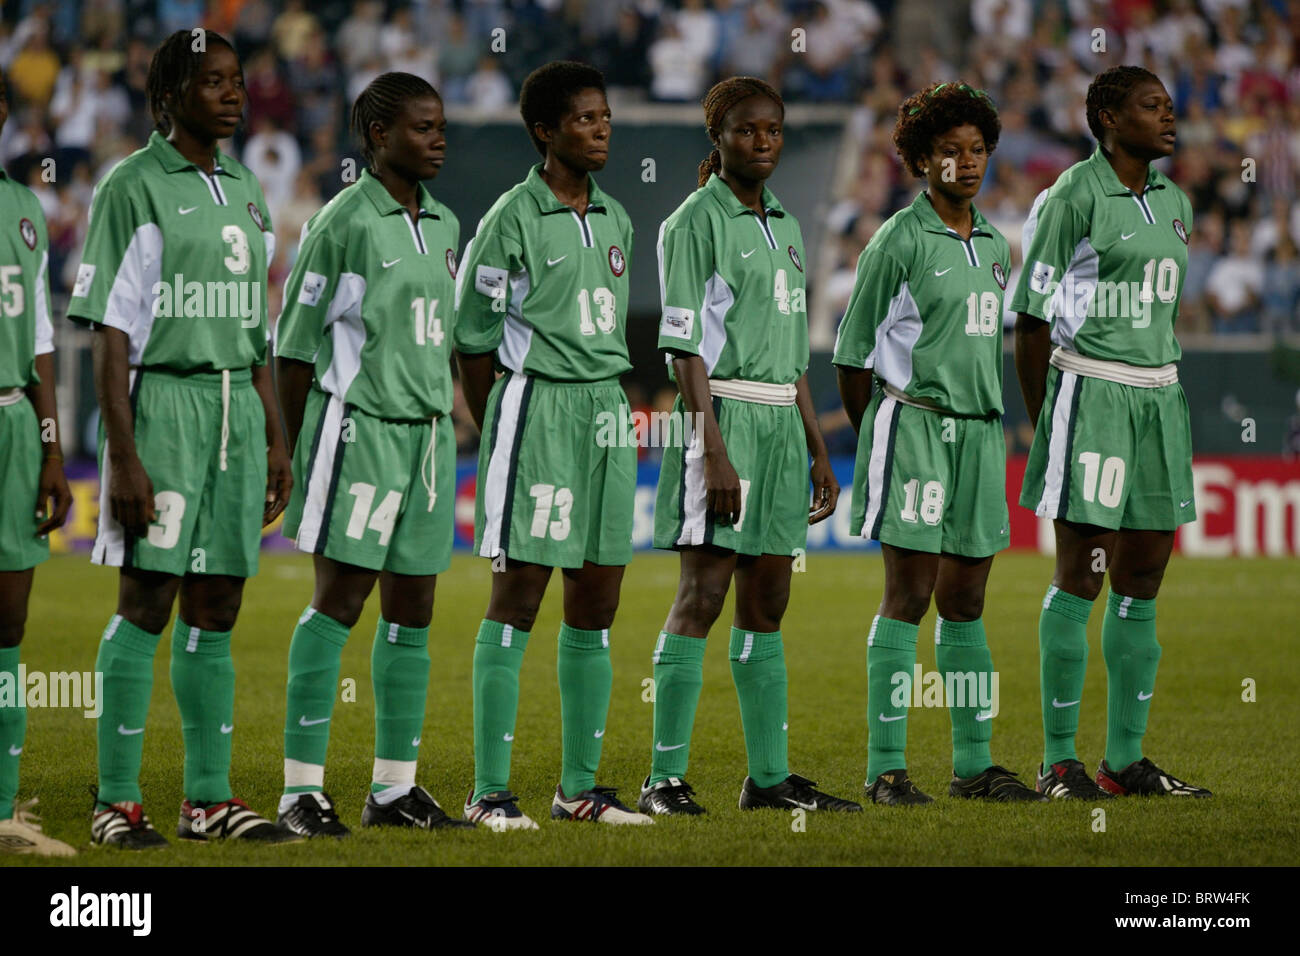 Nigerian players line up prior to a 2003 Women's World Cup soccer match against the United States (see description for details). Stock Photo